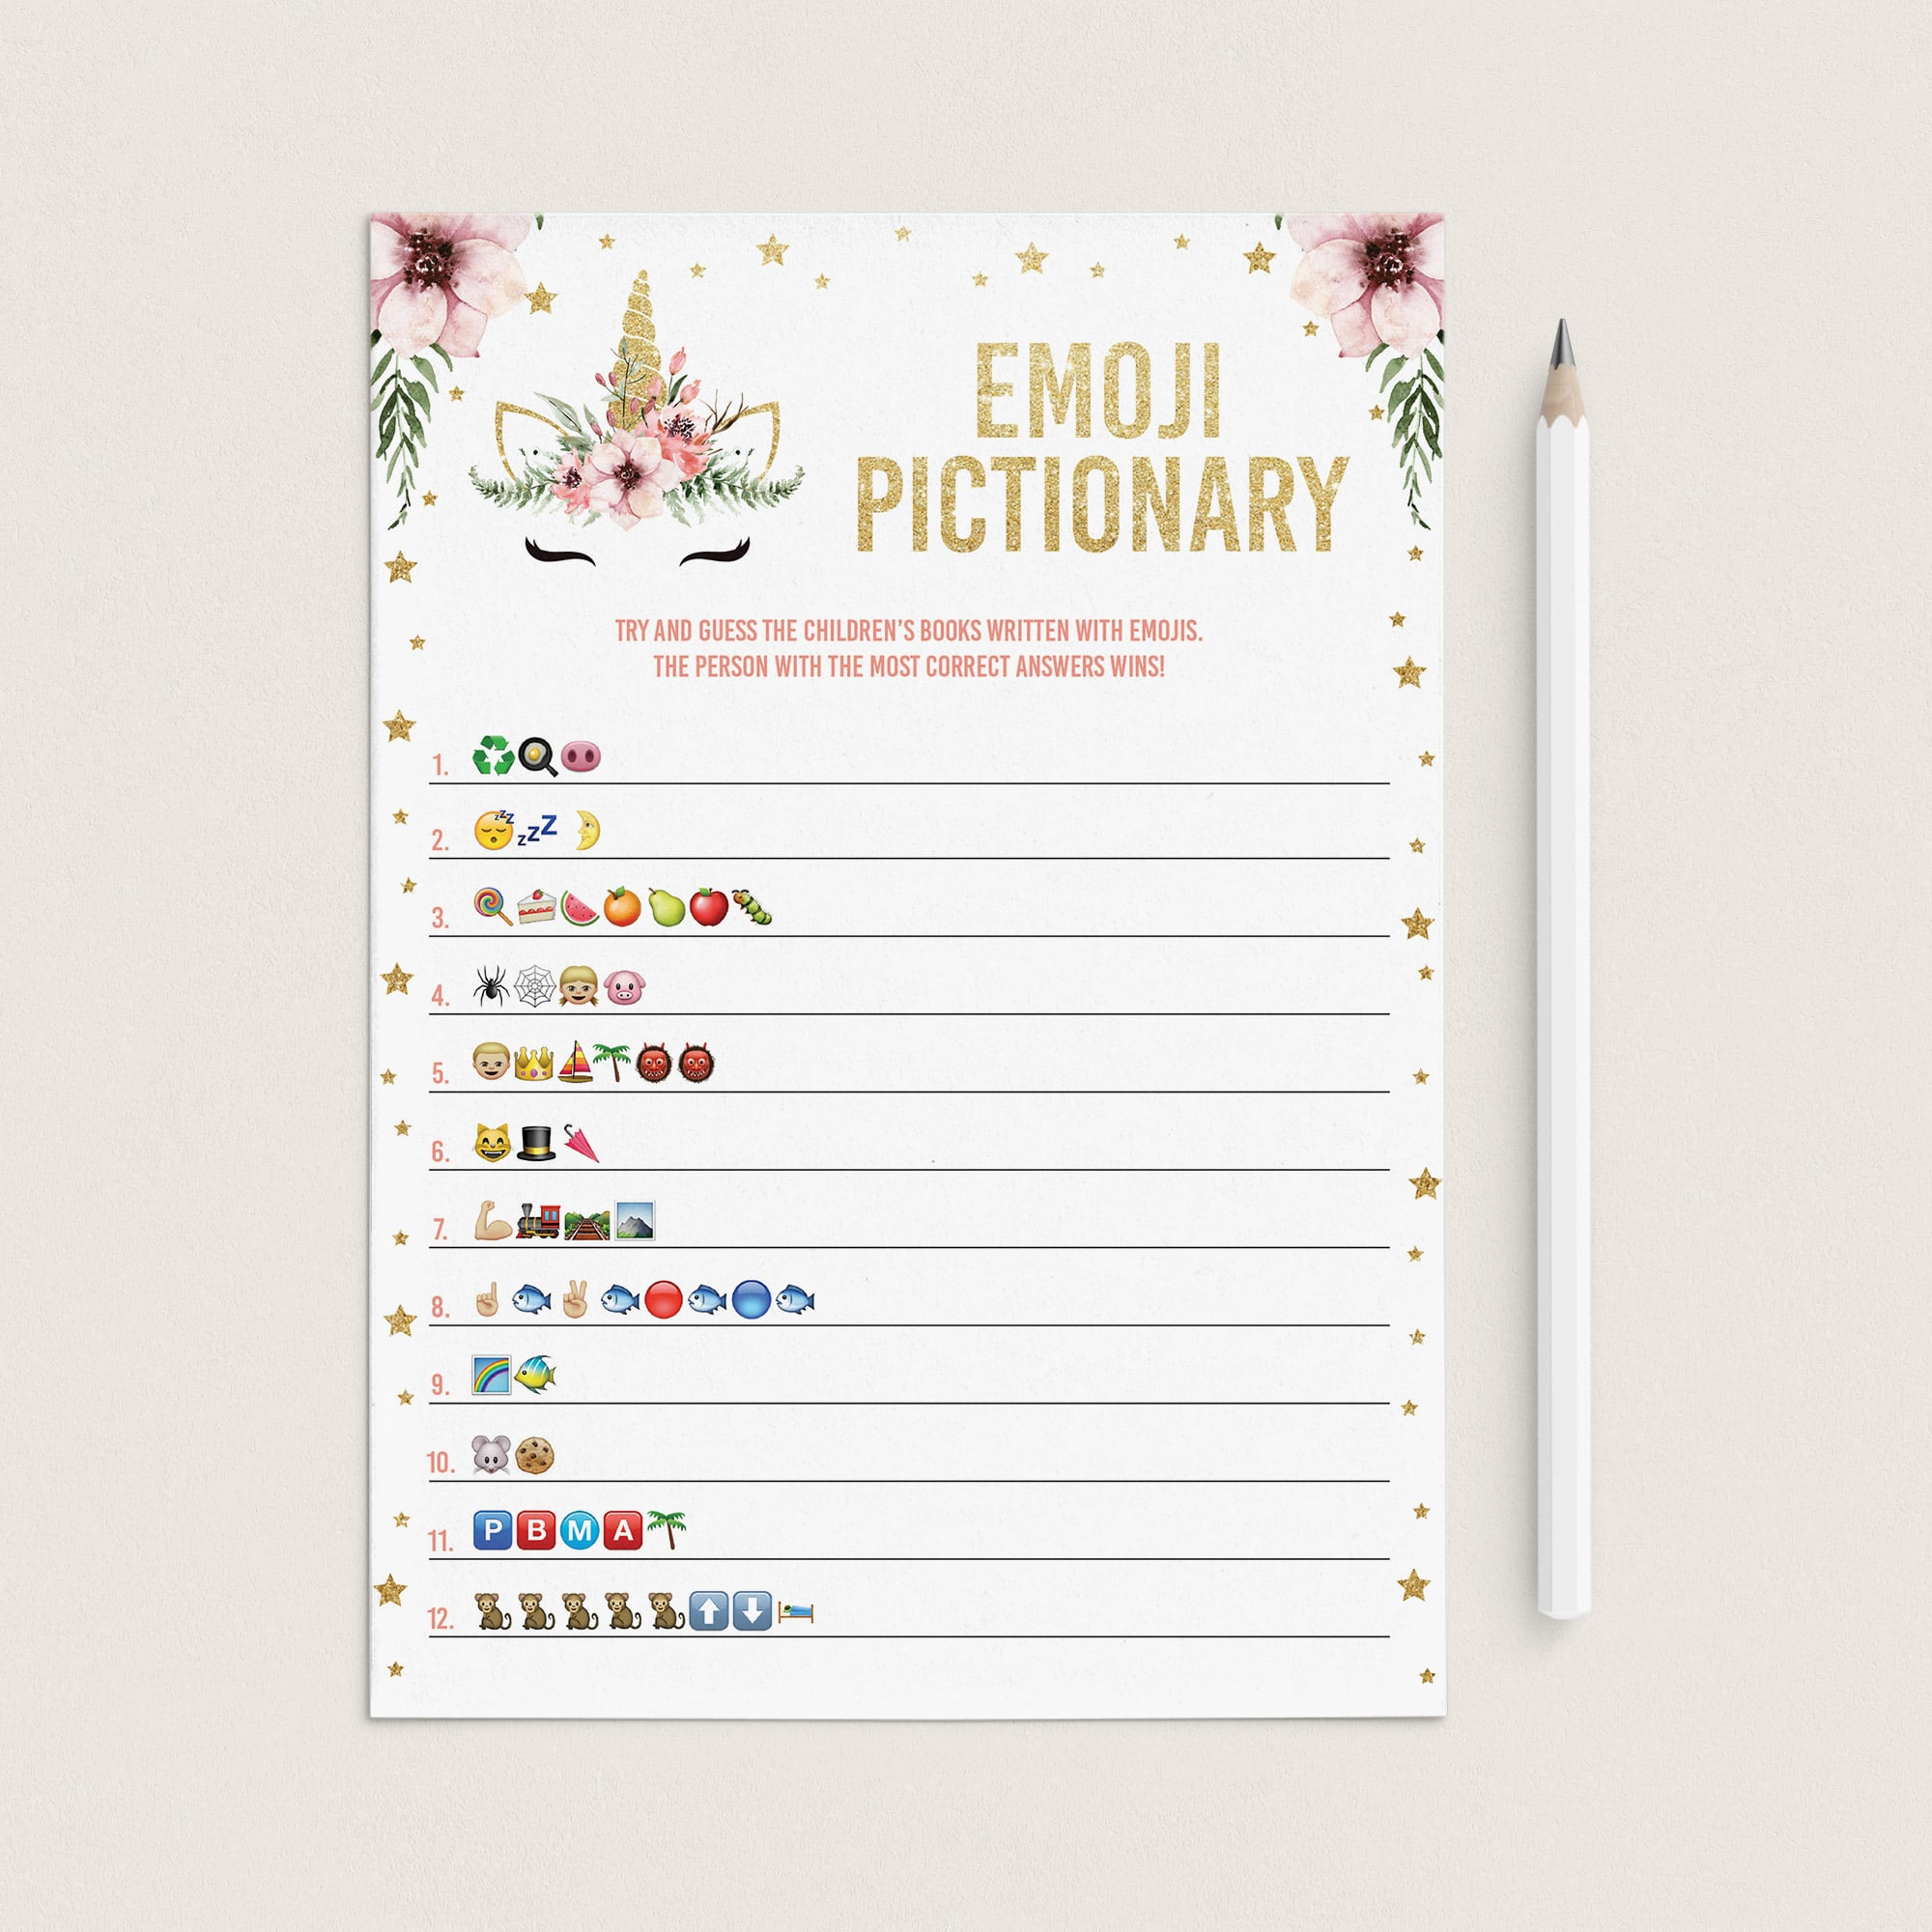 Pink and white baby shower emoji pictionary printable game by LittleSizzle